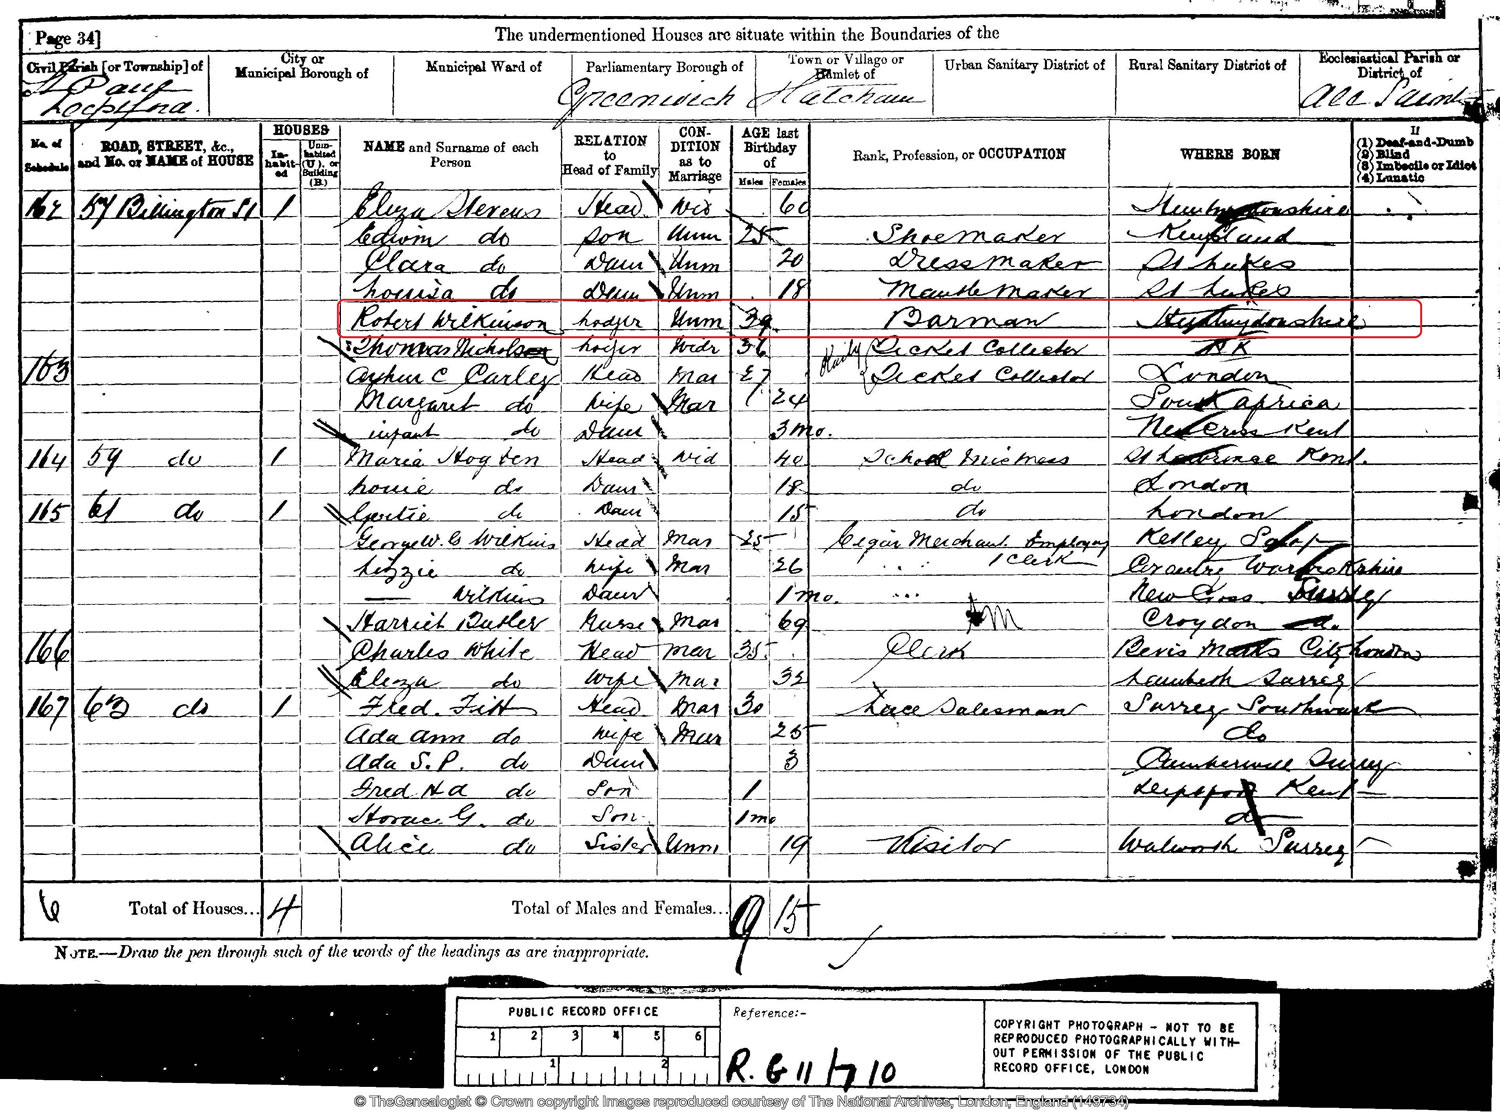 1881 census that shows Joe's 39 year old ancestor listed as a barman living as a lodger in Greenwich